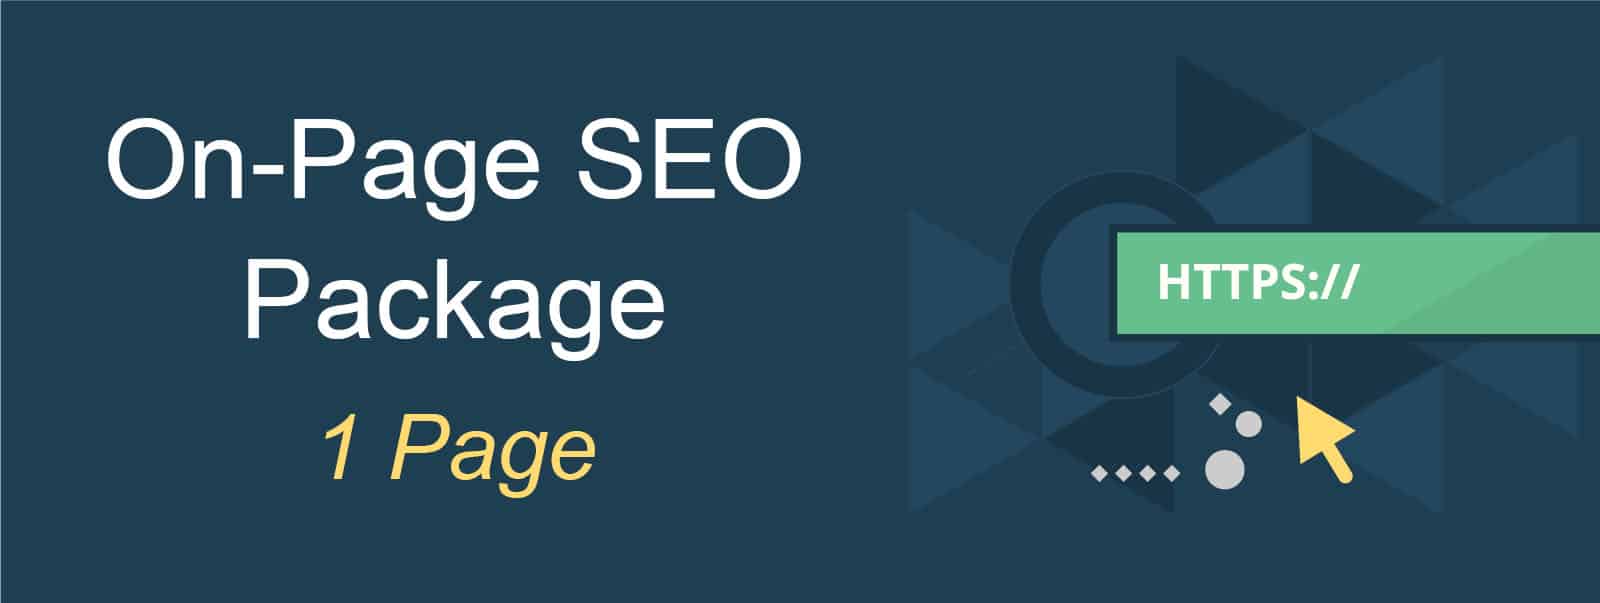 on-page seo package - 1 page